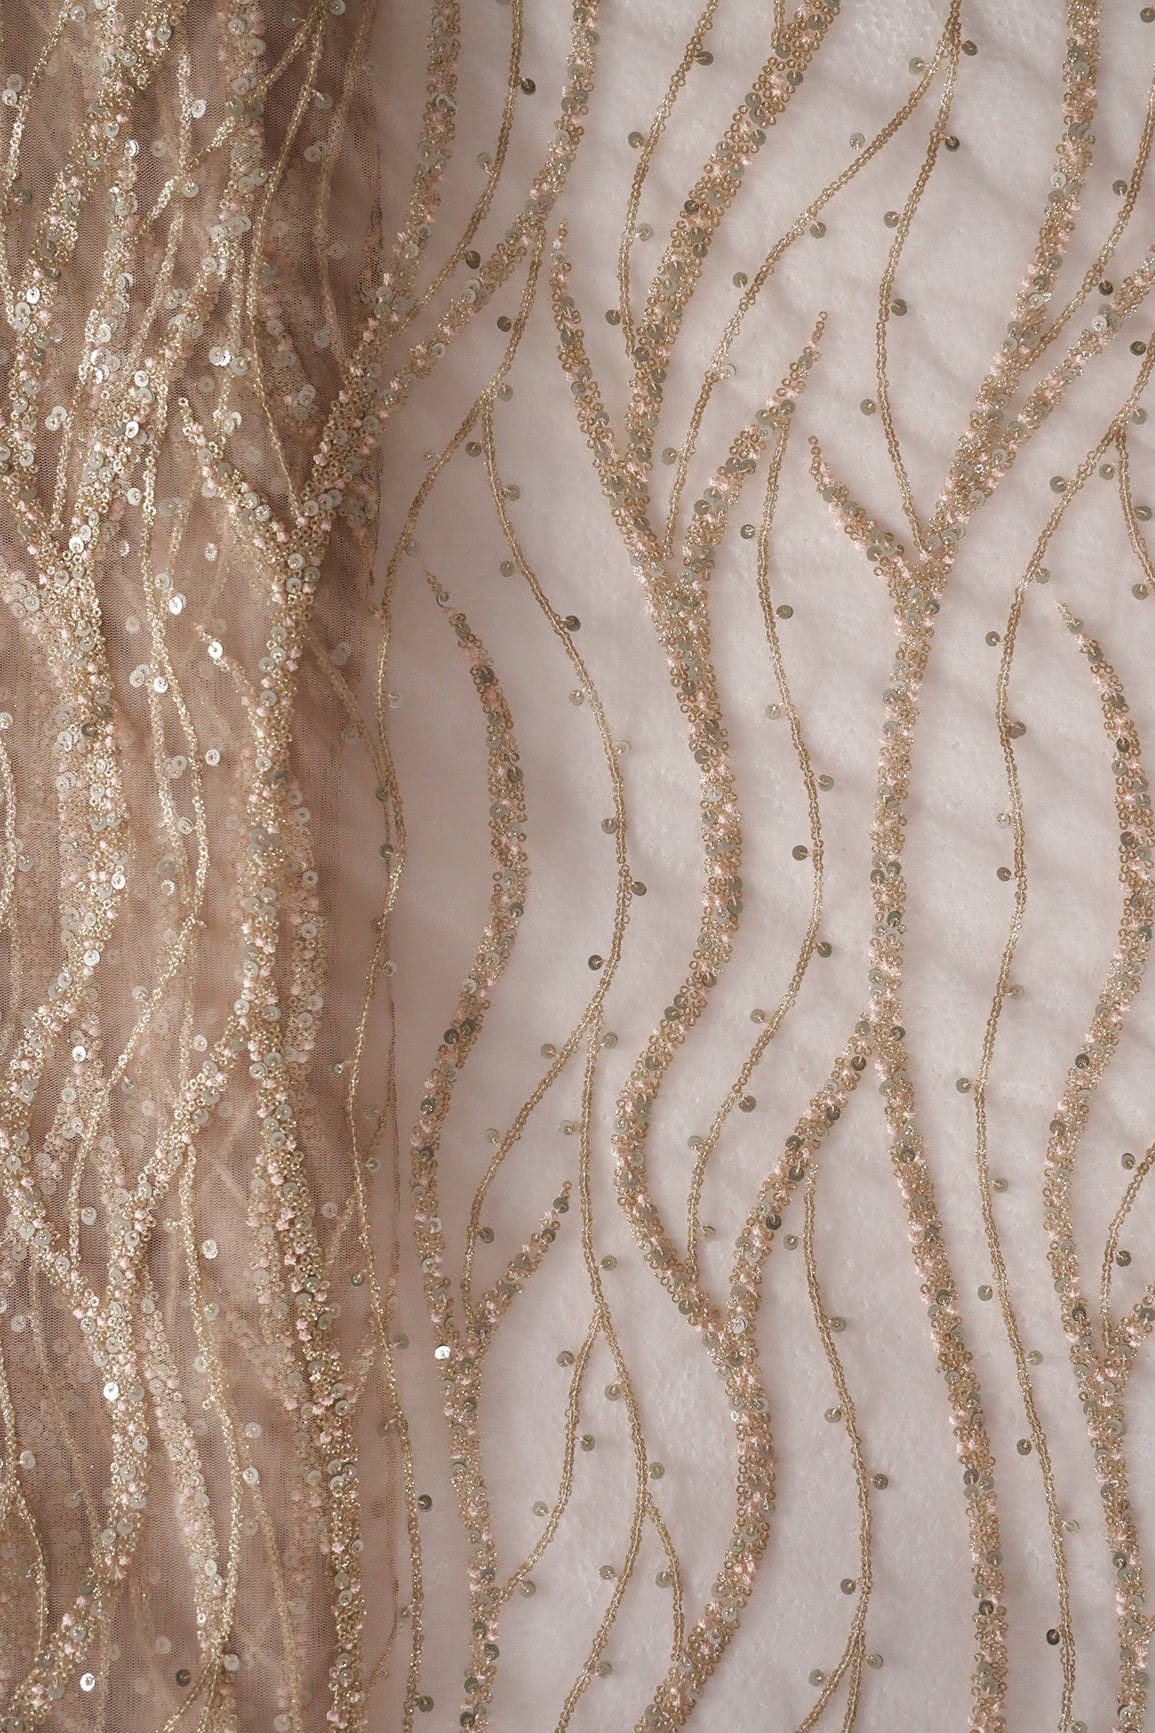 doeraa Embroidery Fabrics Gold And Silver Sequins With Peach Thread Embroidery on Peach Soft Net